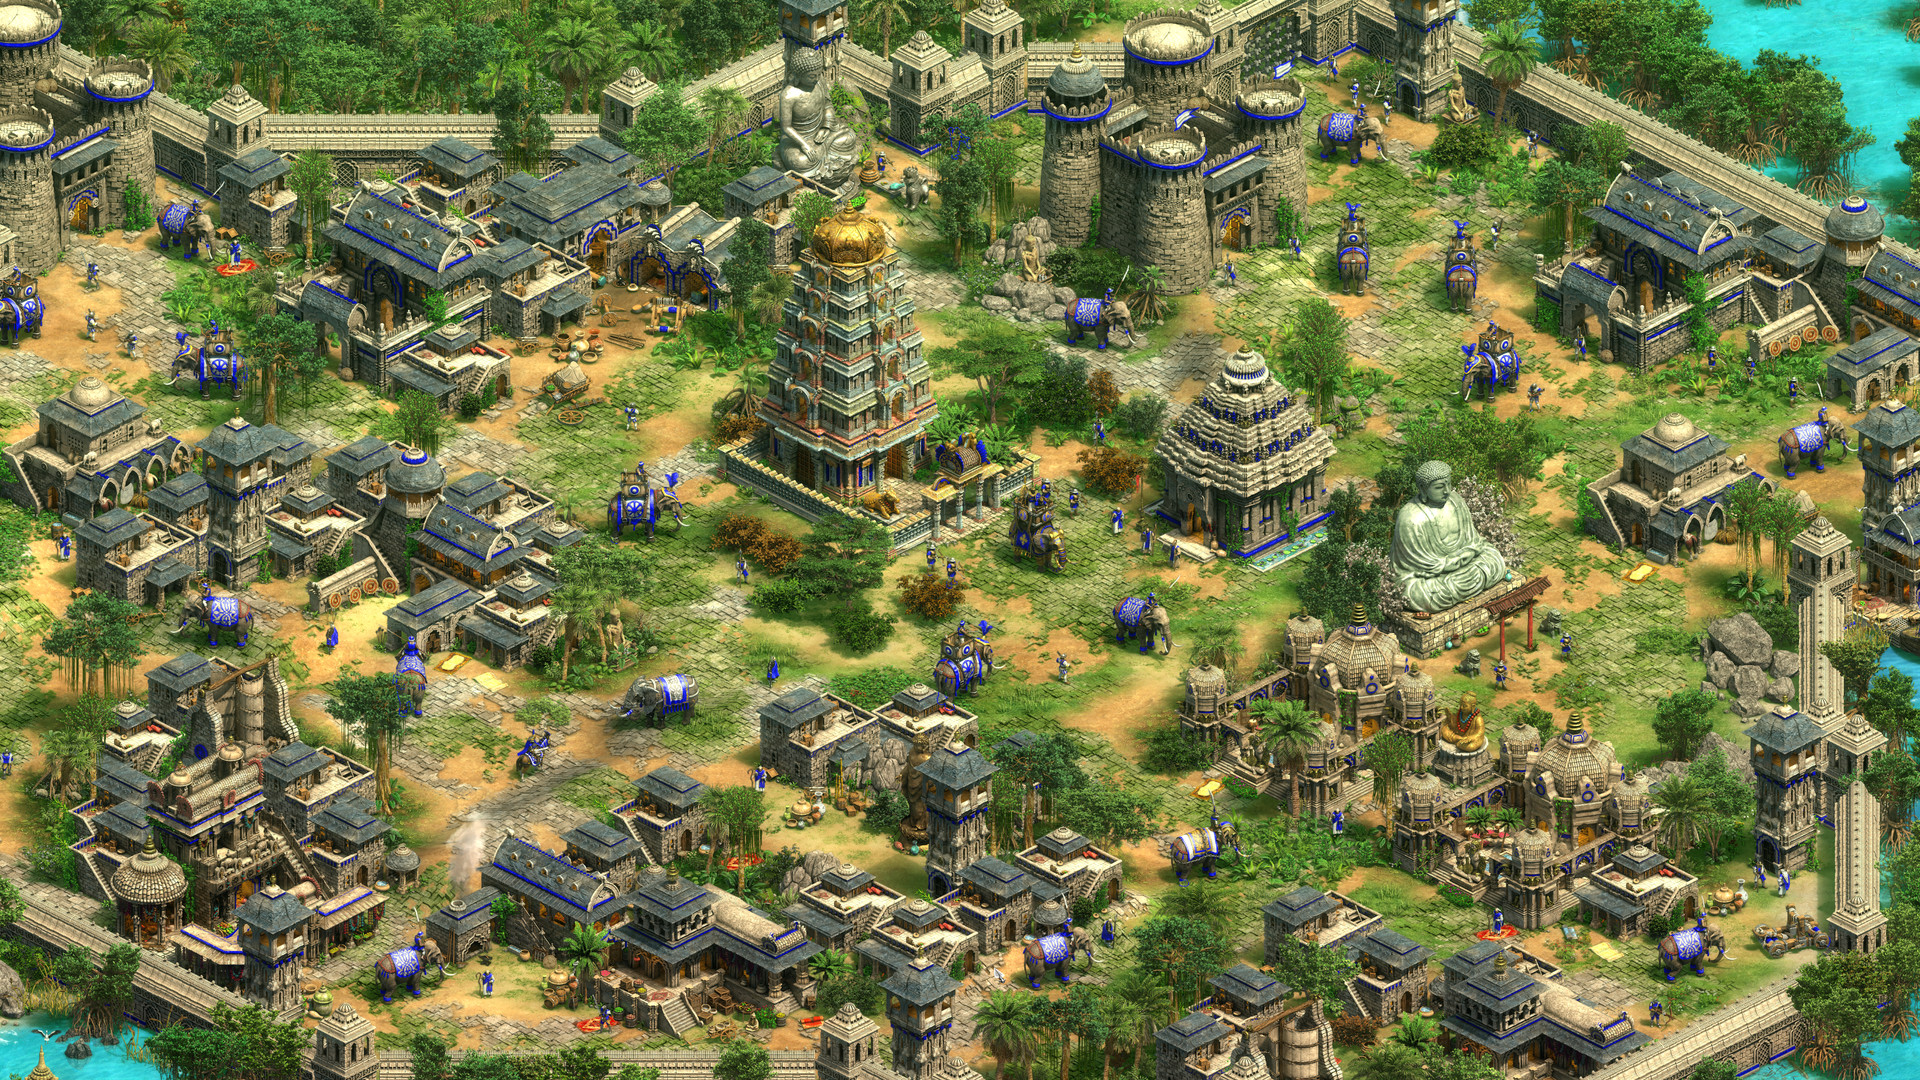 Age of Empires II: Definitive Edition on Steam